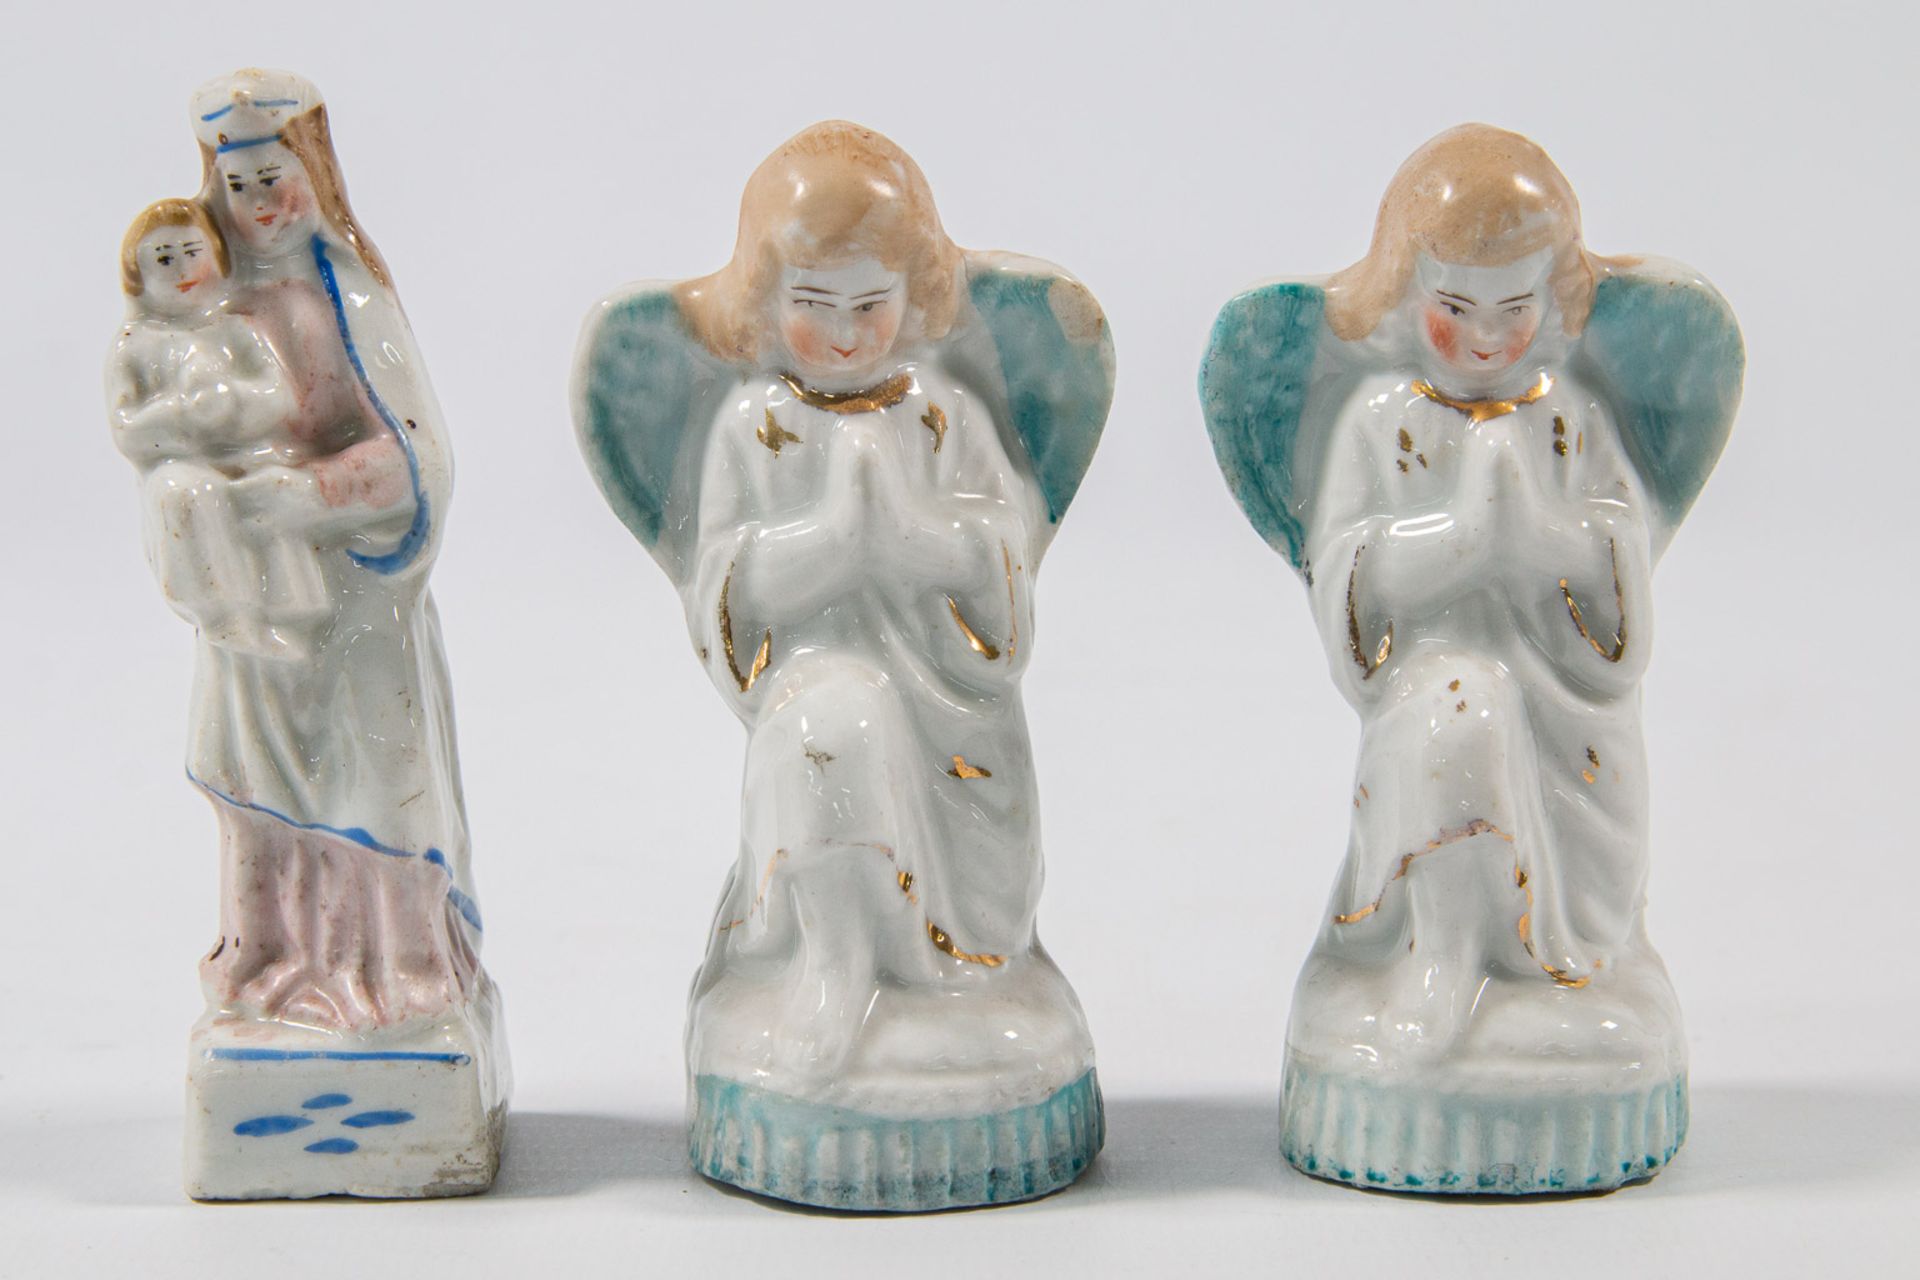 A collection of 11 bisque porcelain holy statues, Mary, Joseph, and Madonna. - Image 38 of 49